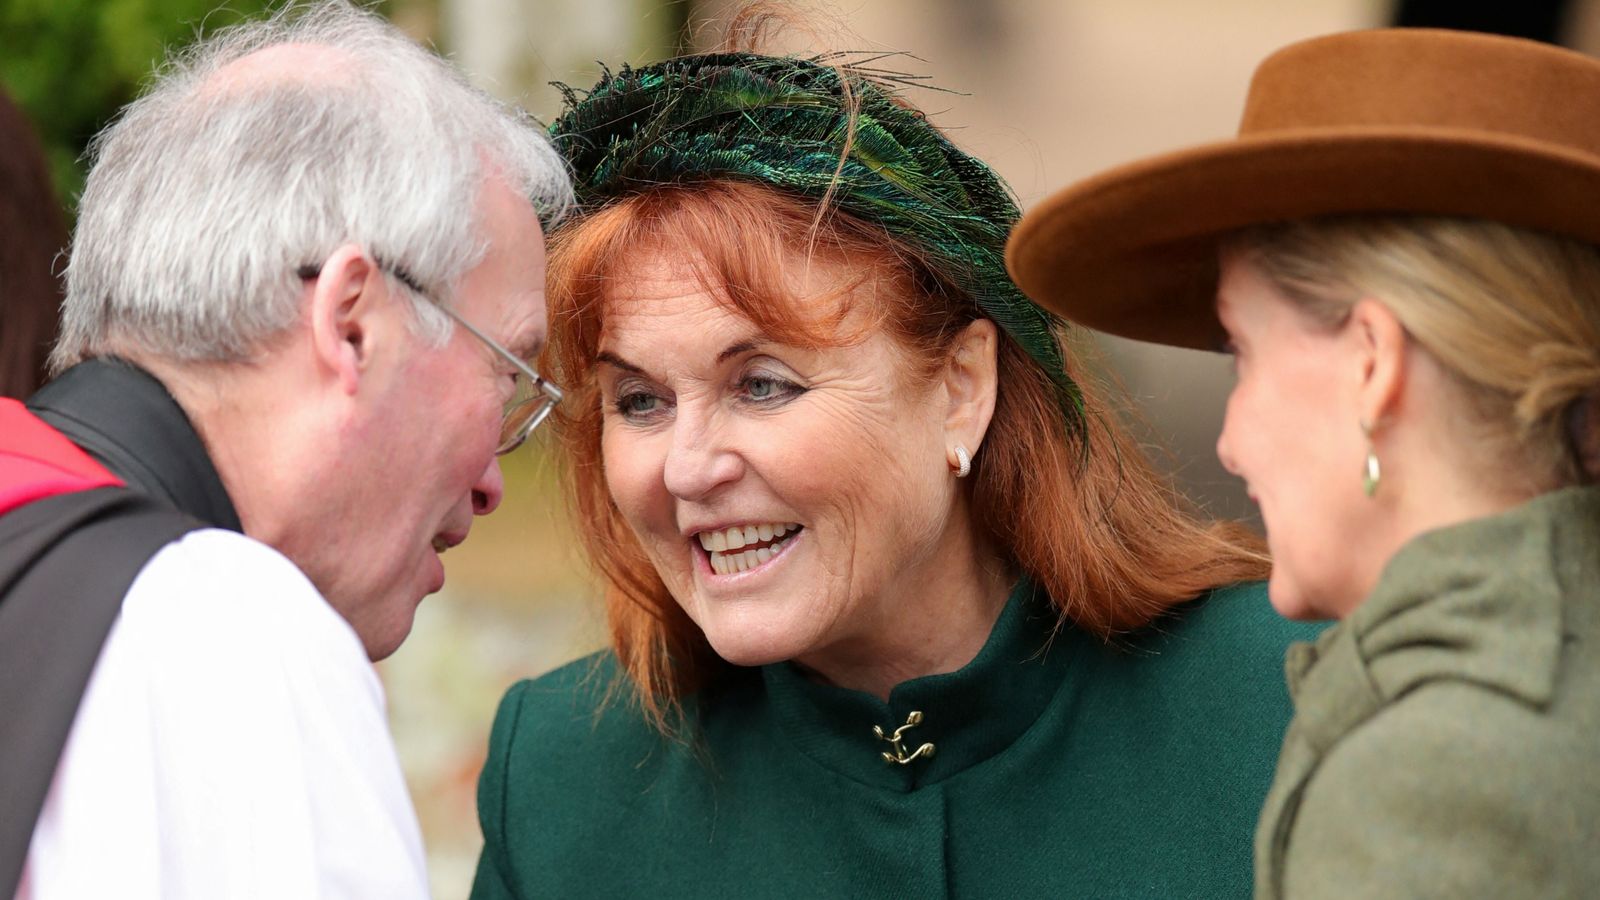 Sarah, Duchess of York, joins royal Christmas church service for first time since early 1990s